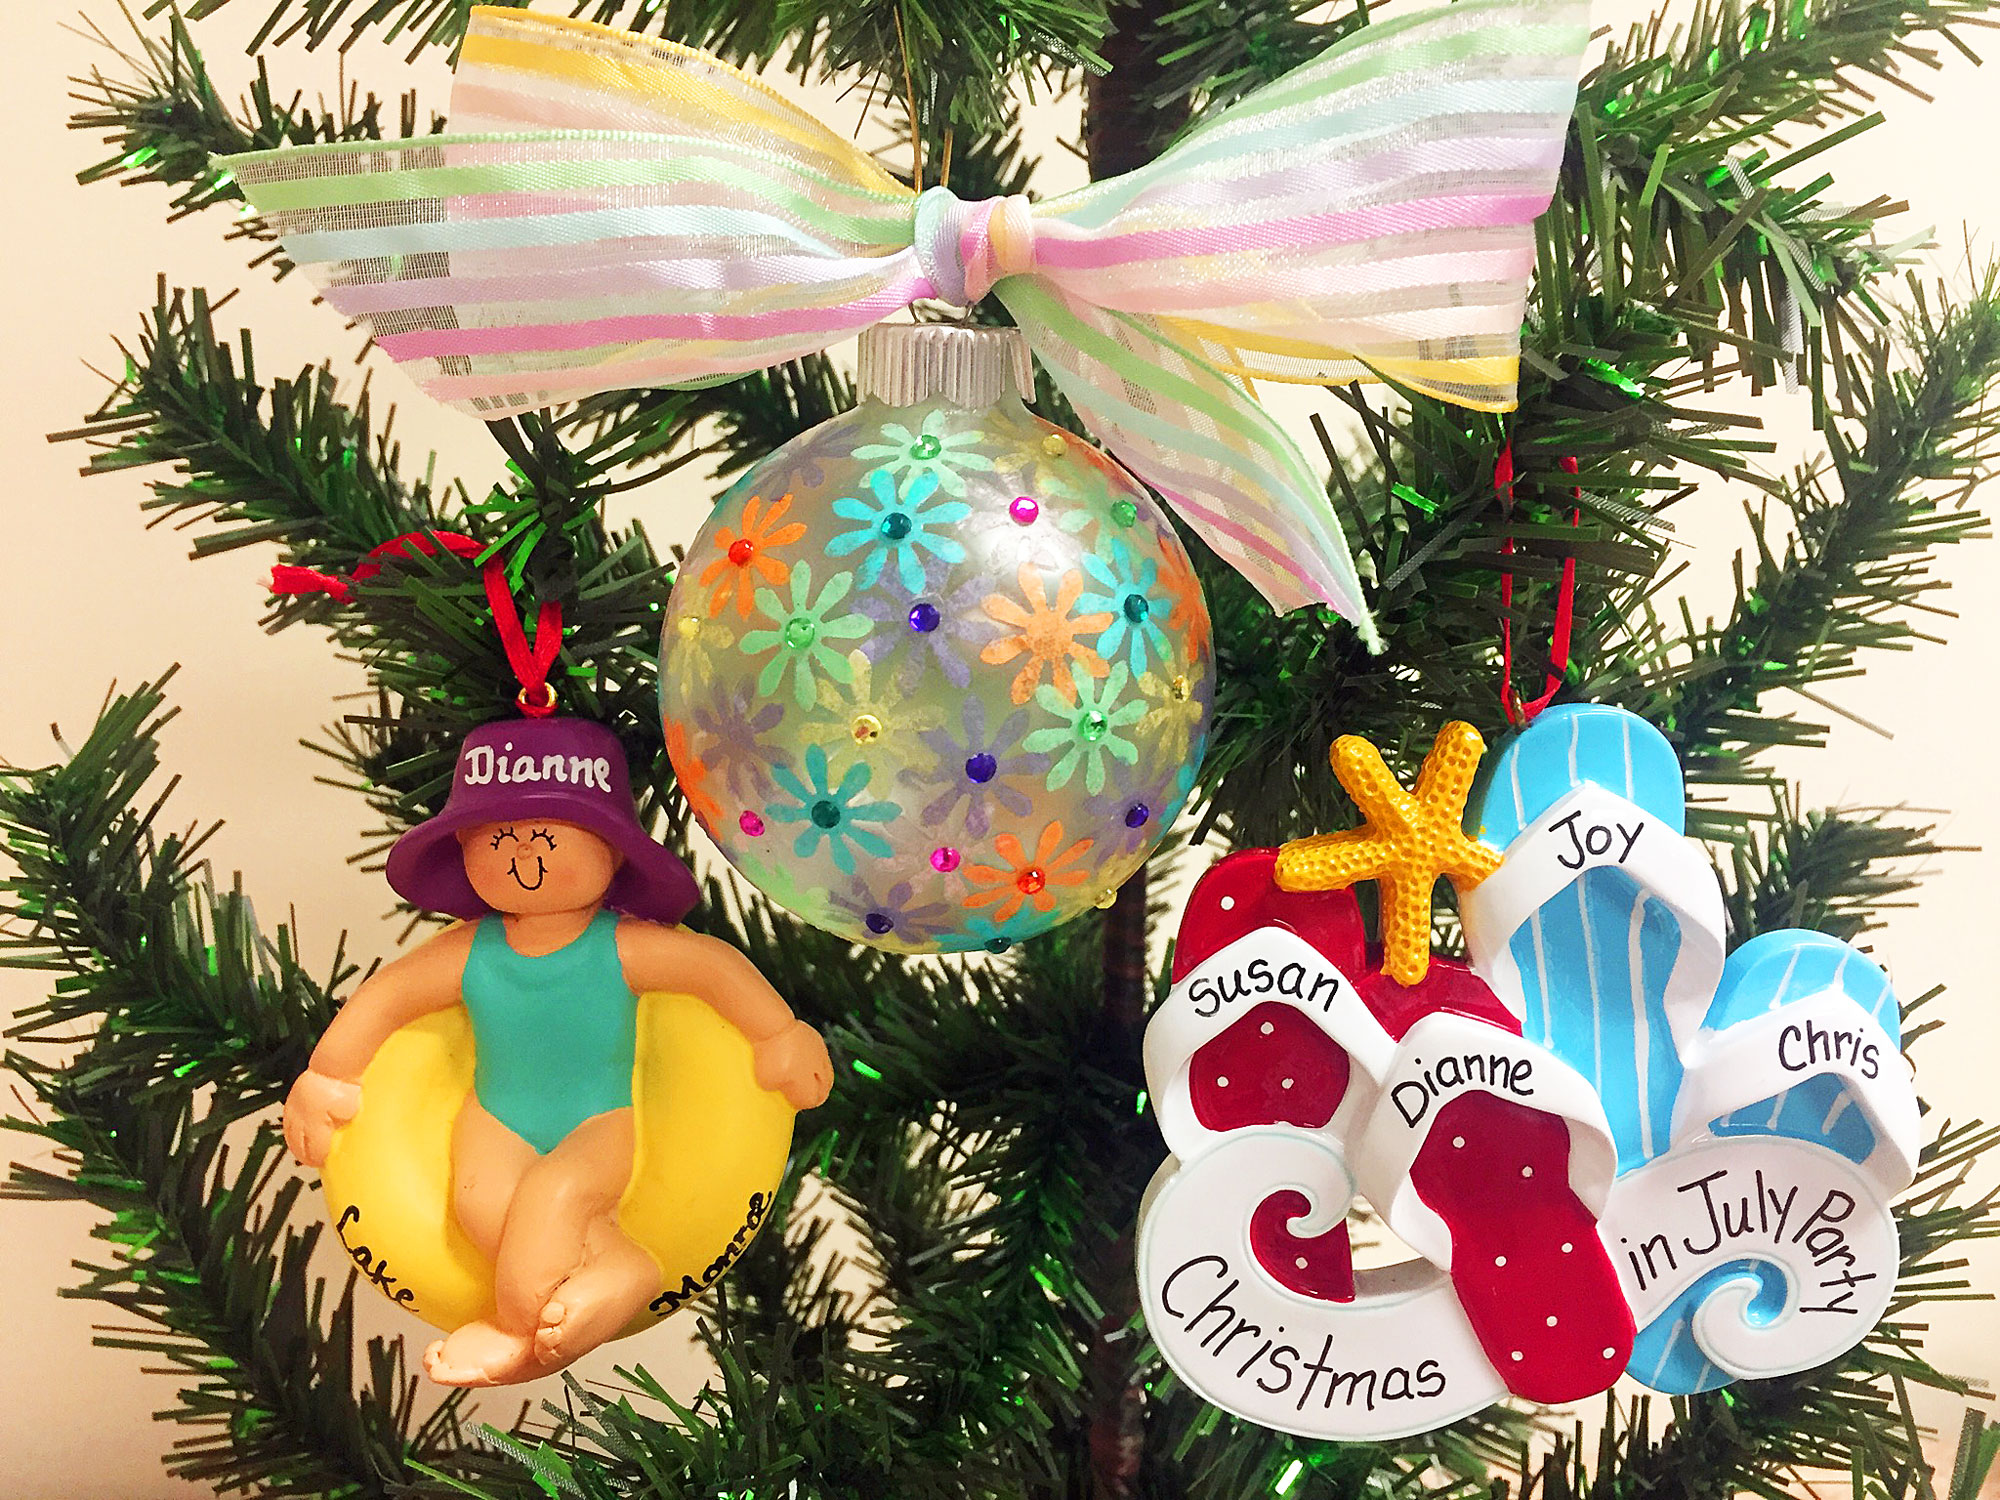 A colorful DIY ball ornament, an ornament with personalzied flipflops, and an ornament with a woman floating in a simming doughnut wearing a purple hat | OrnamentShop.com